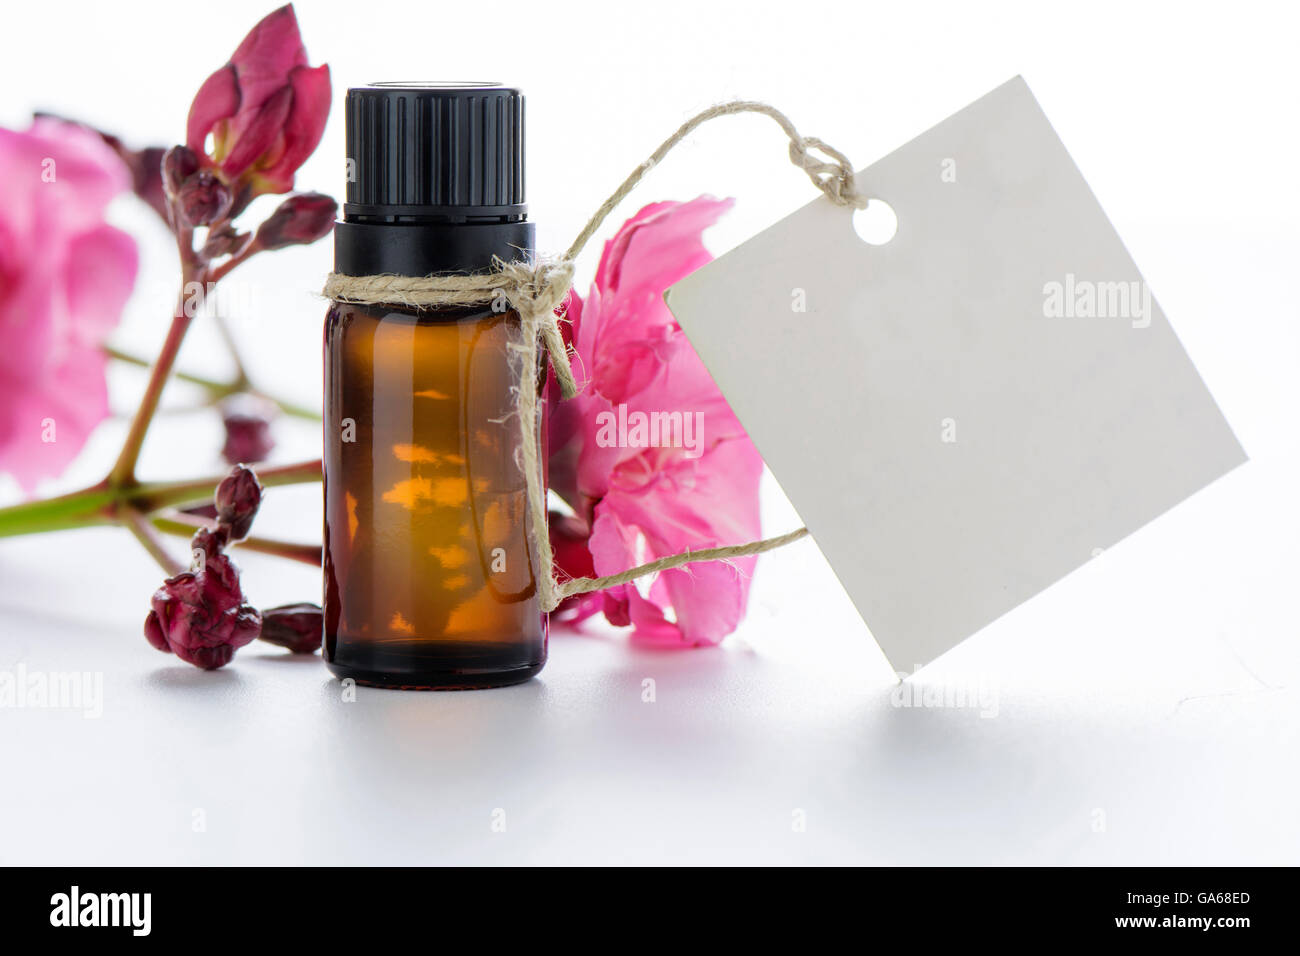 Essential oil, empty tags and roses flowers Stock Photo